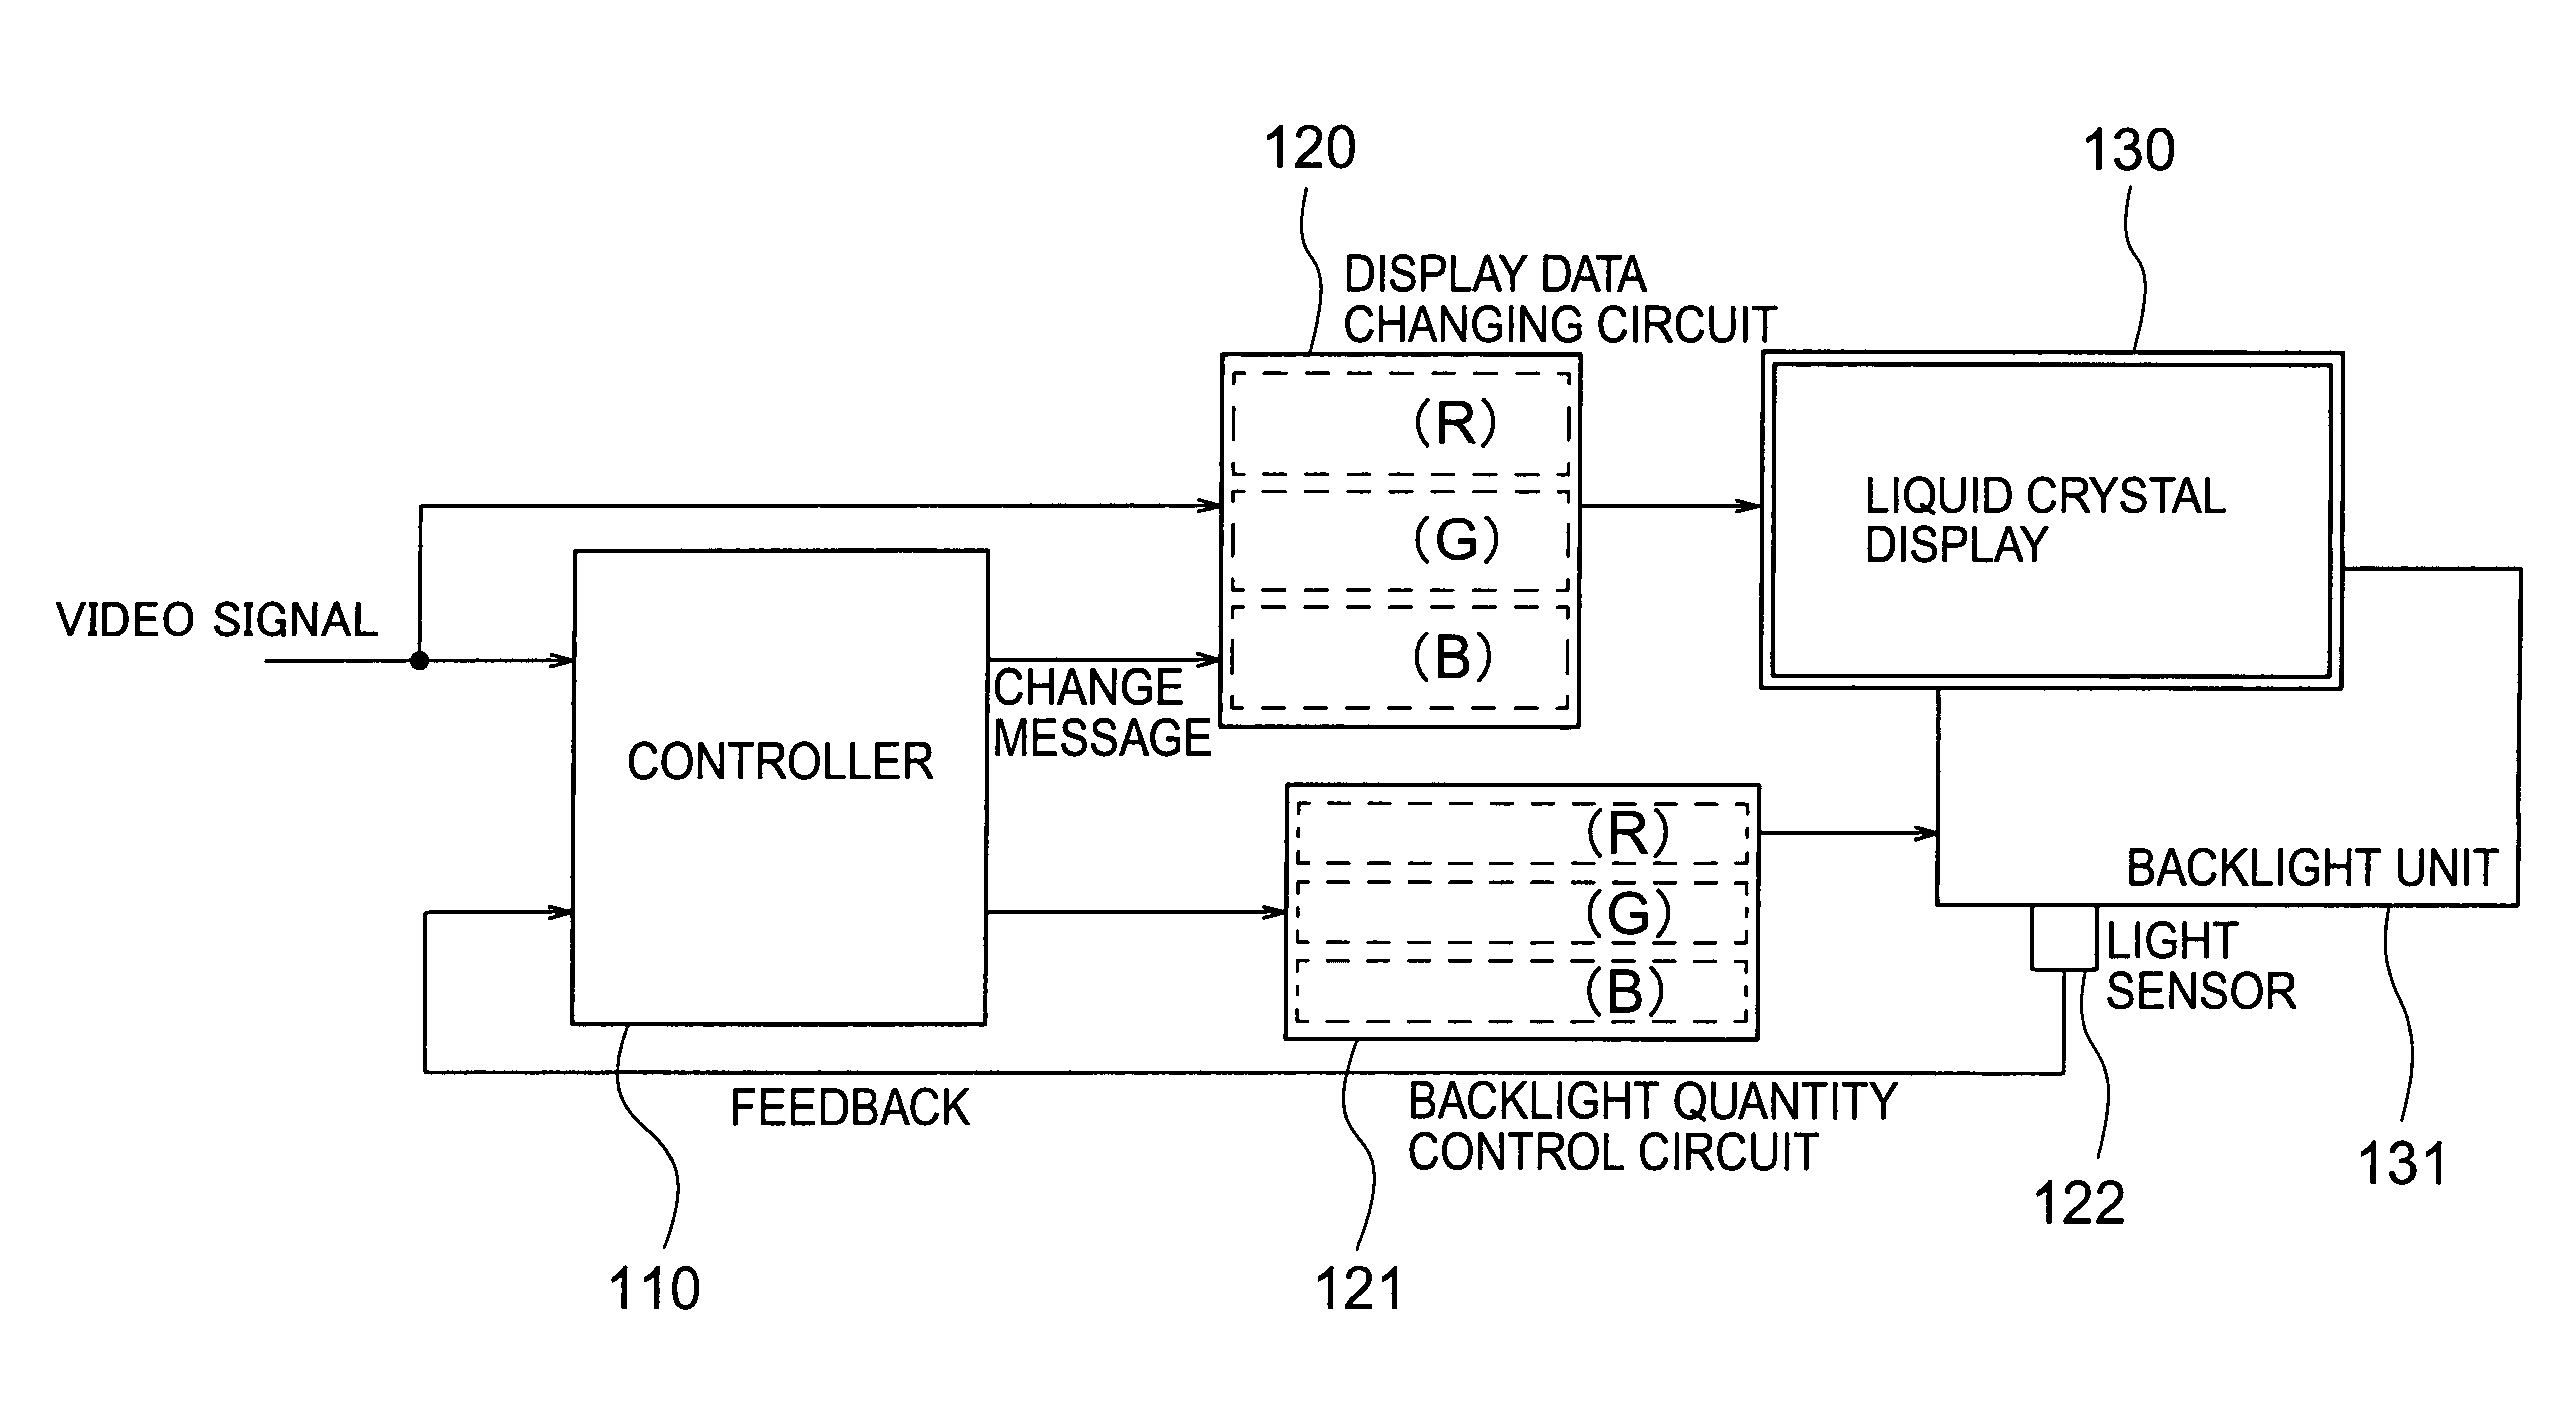 Liquid crystal display apparatus with control of LCD and backlight corresponding to an image